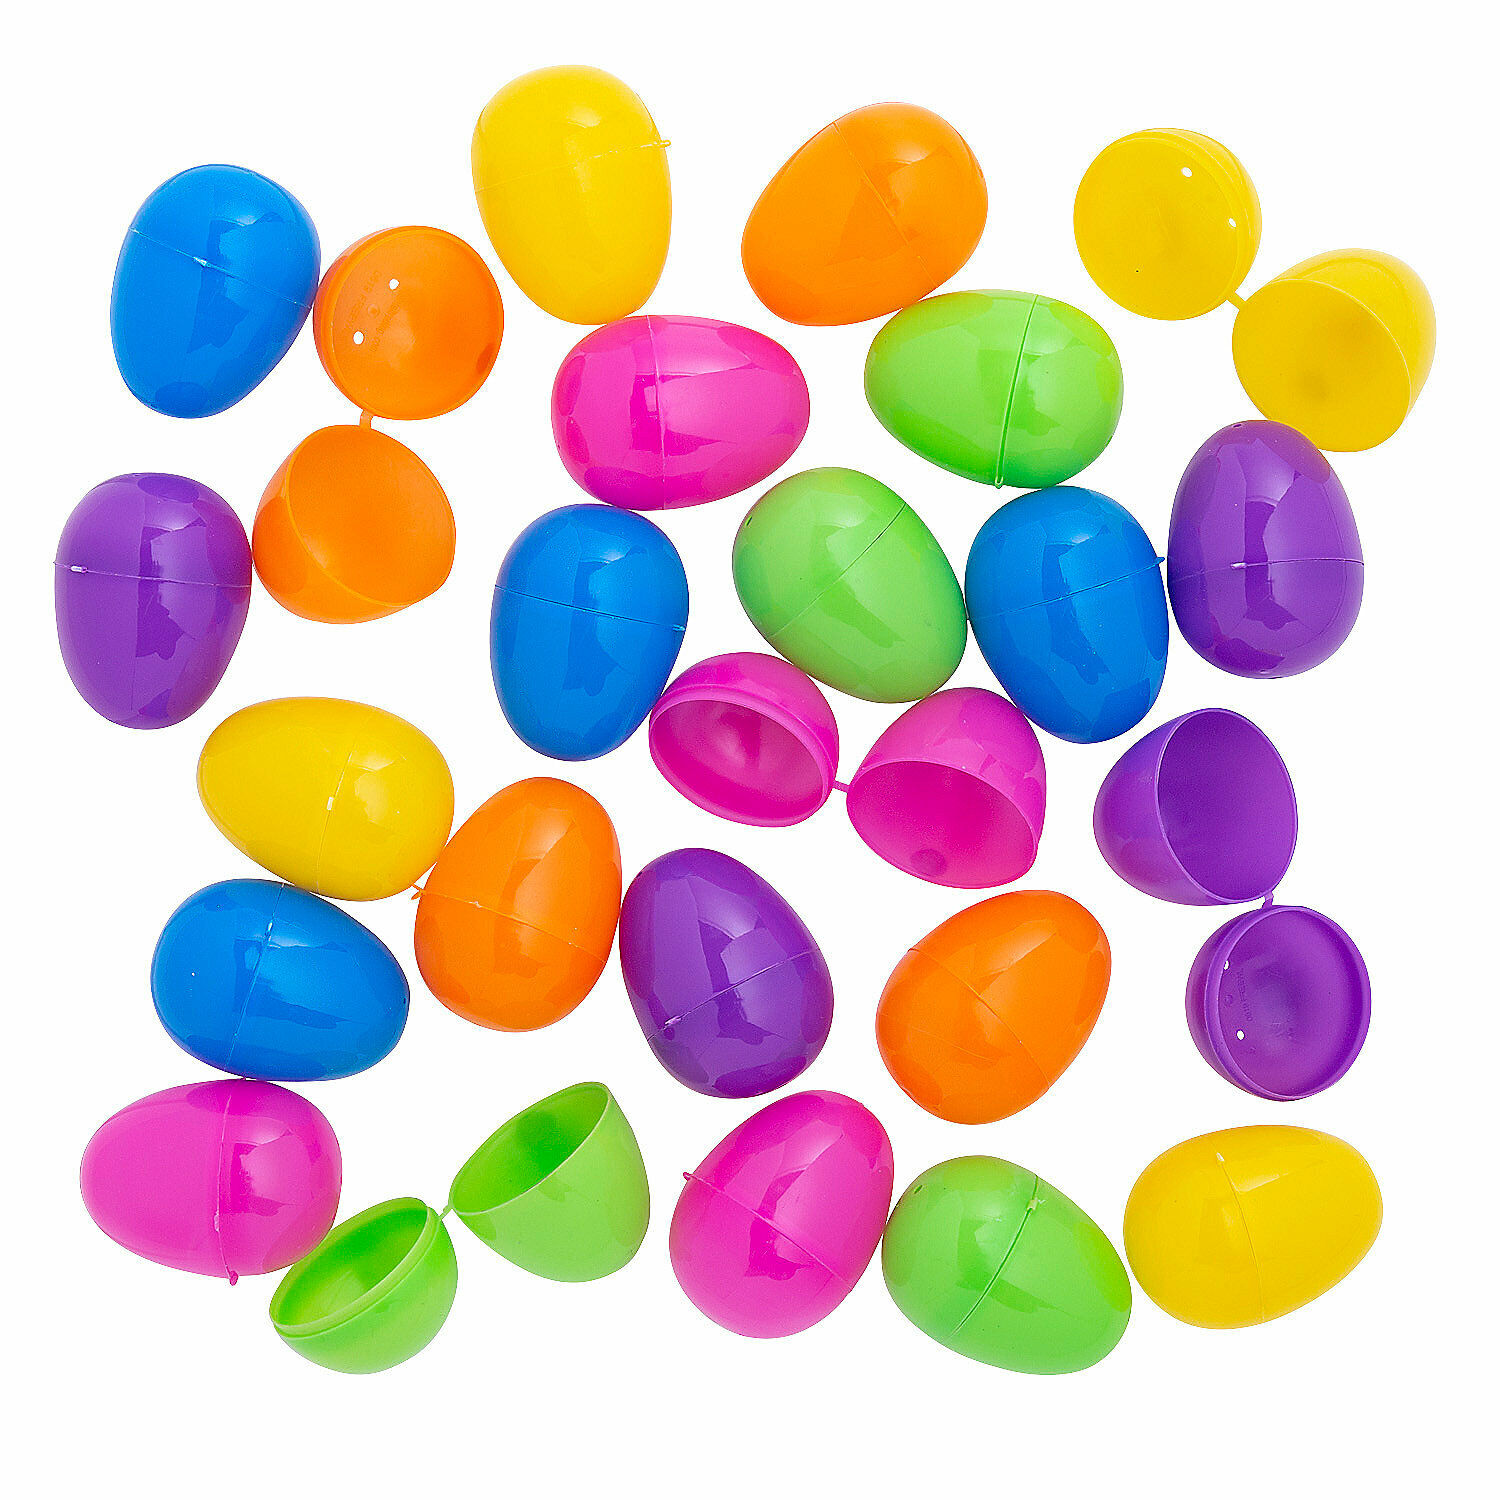 Bulk Colorful Bright Plastic Easter Eggs - Party Supplies - 144 Pieces